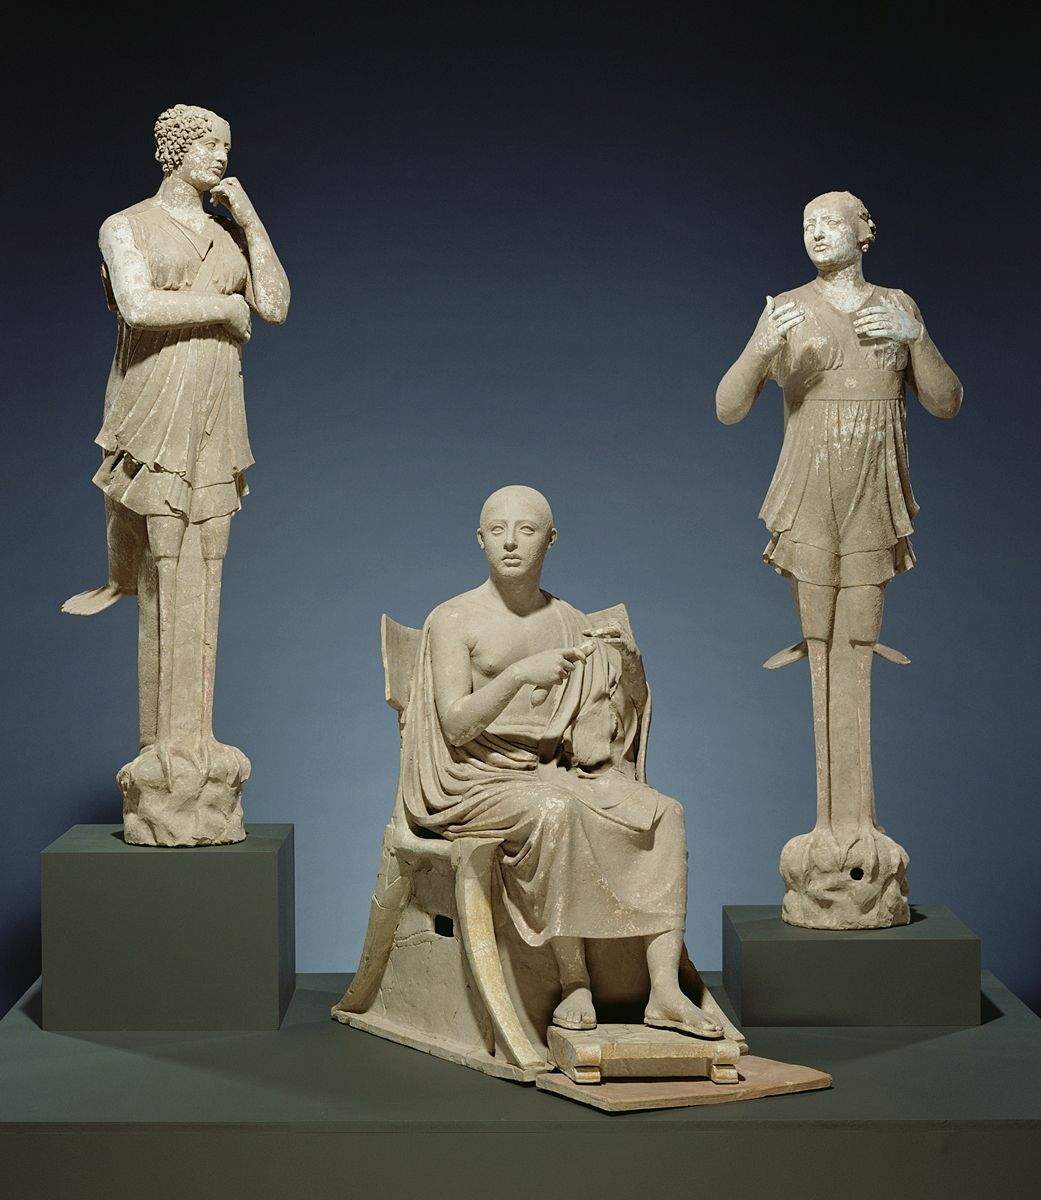 Getty will return rare and highly prized sculptural group of Orpheus and the Sirens to Italy